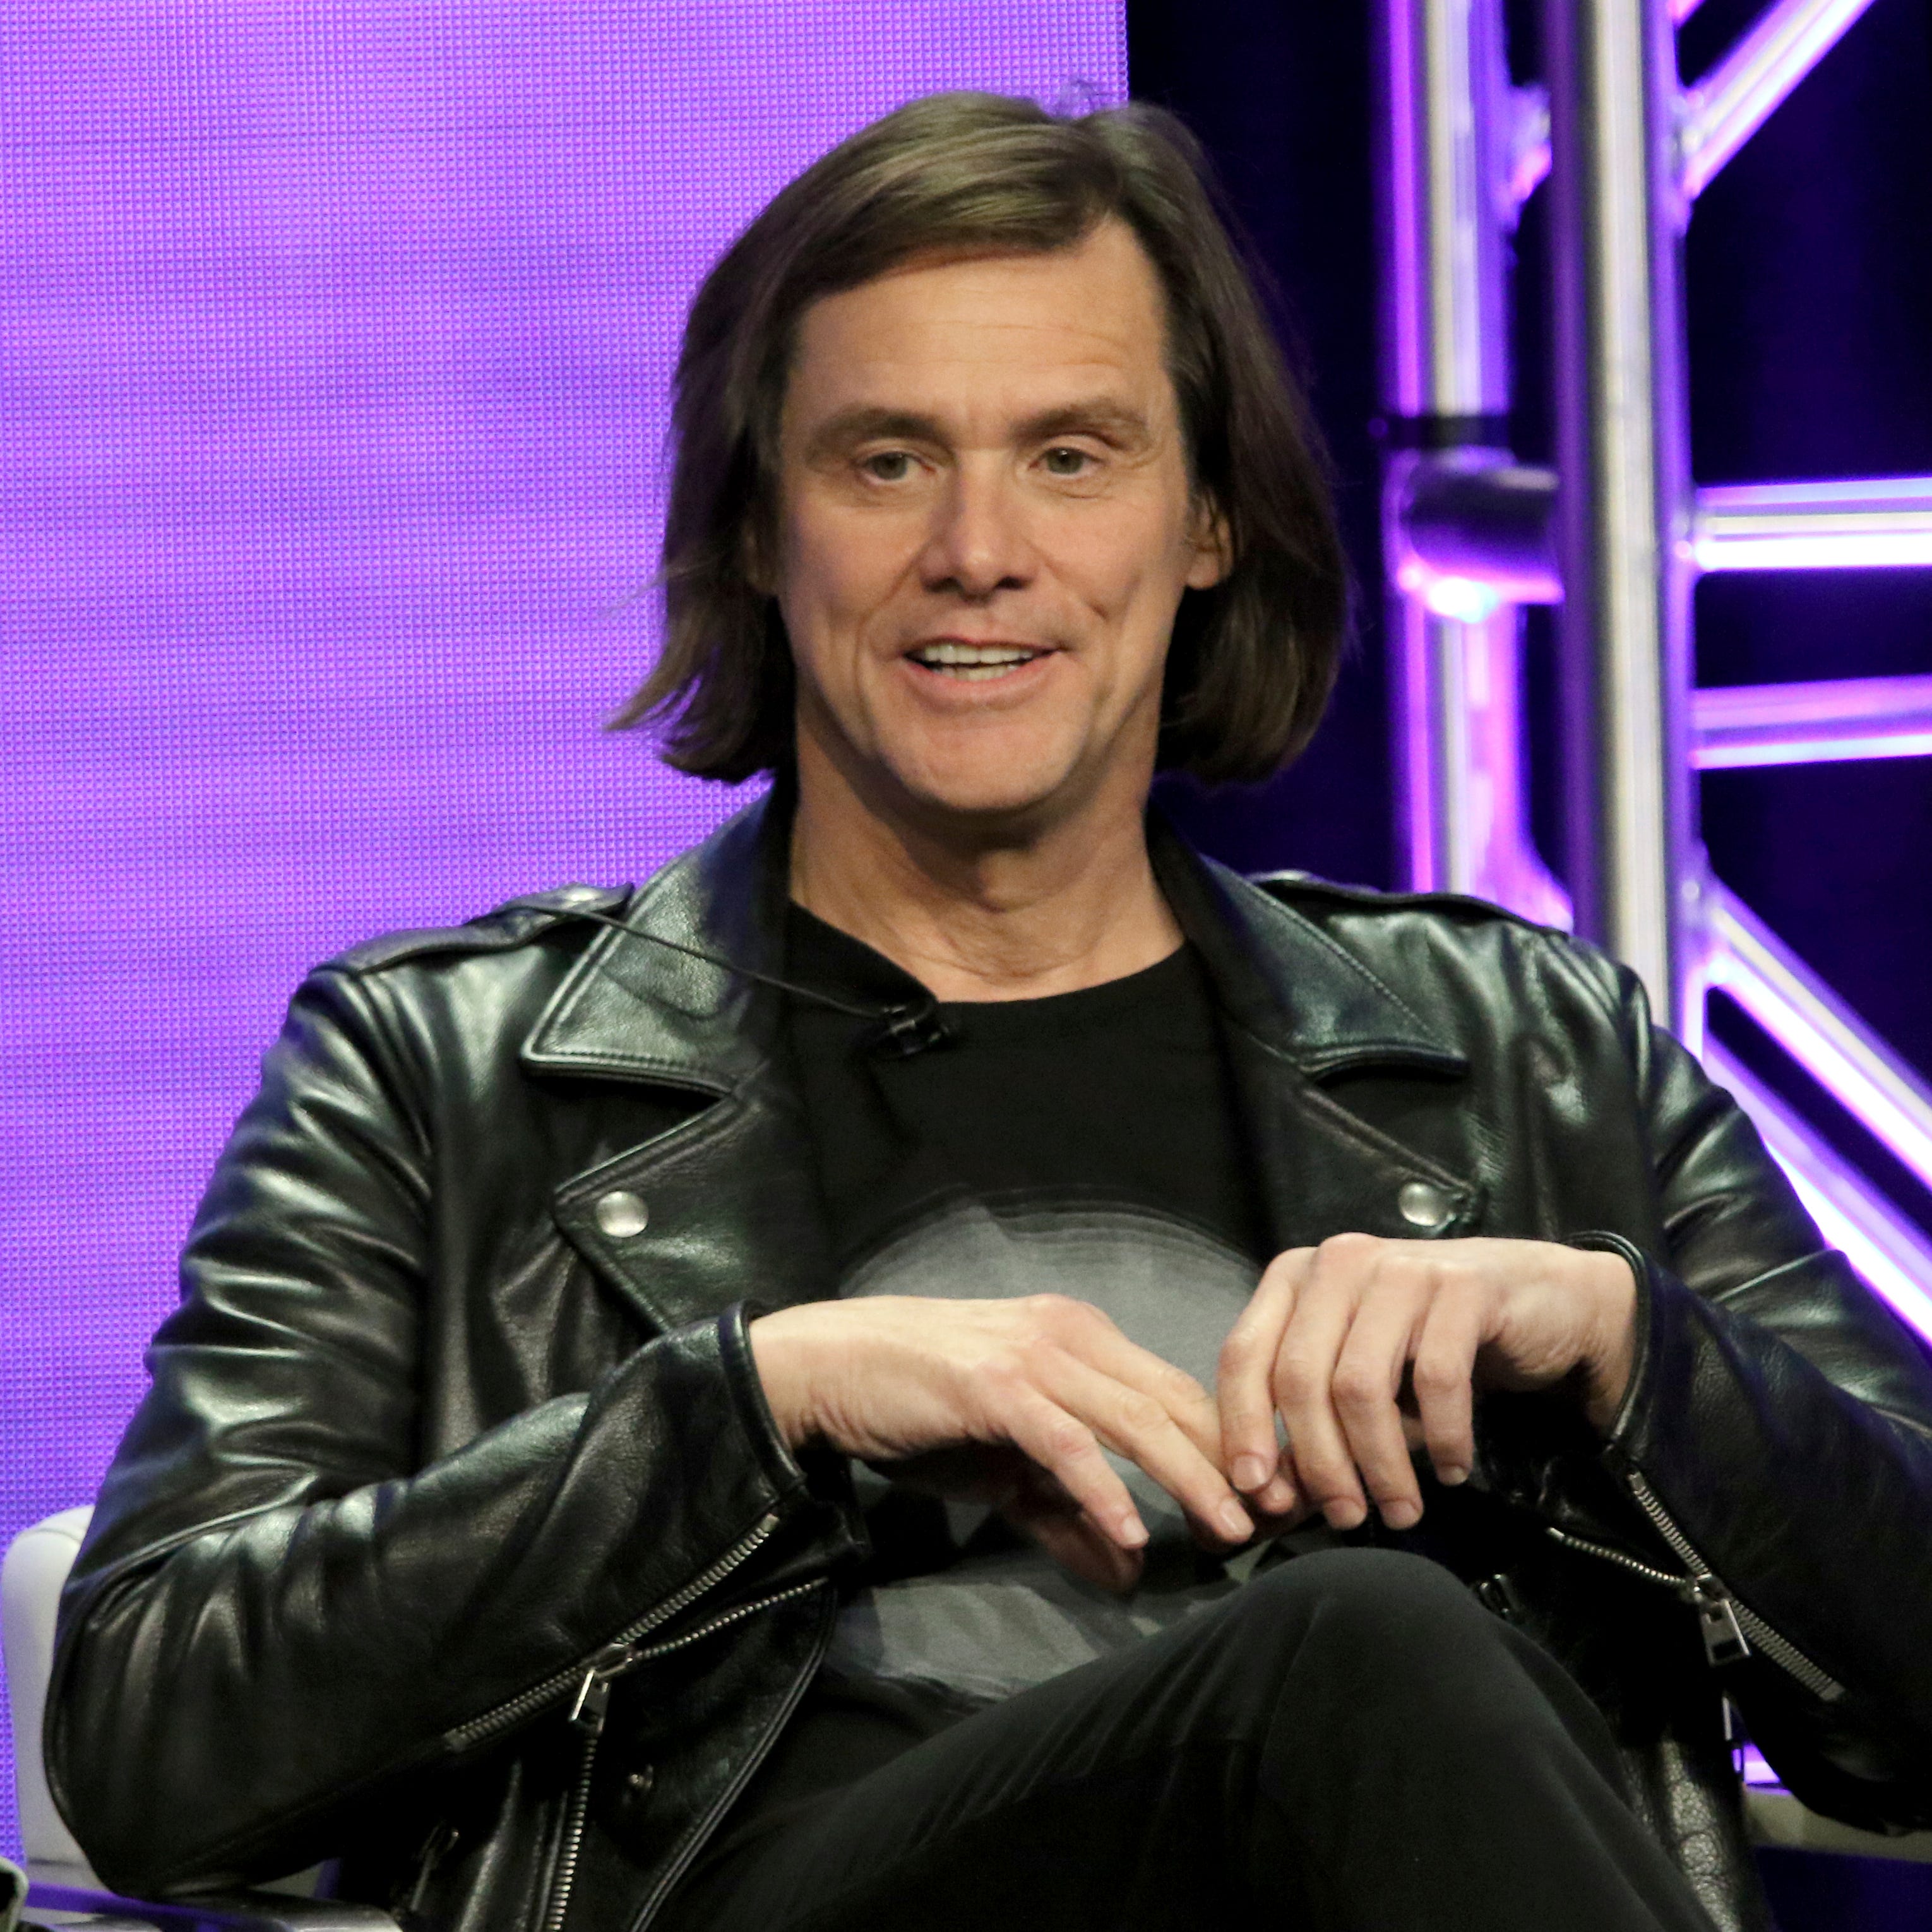 Jim Carrey talks during a Showtime panel for 'Kidding' Monday at the Television Critics Association summer press tour.